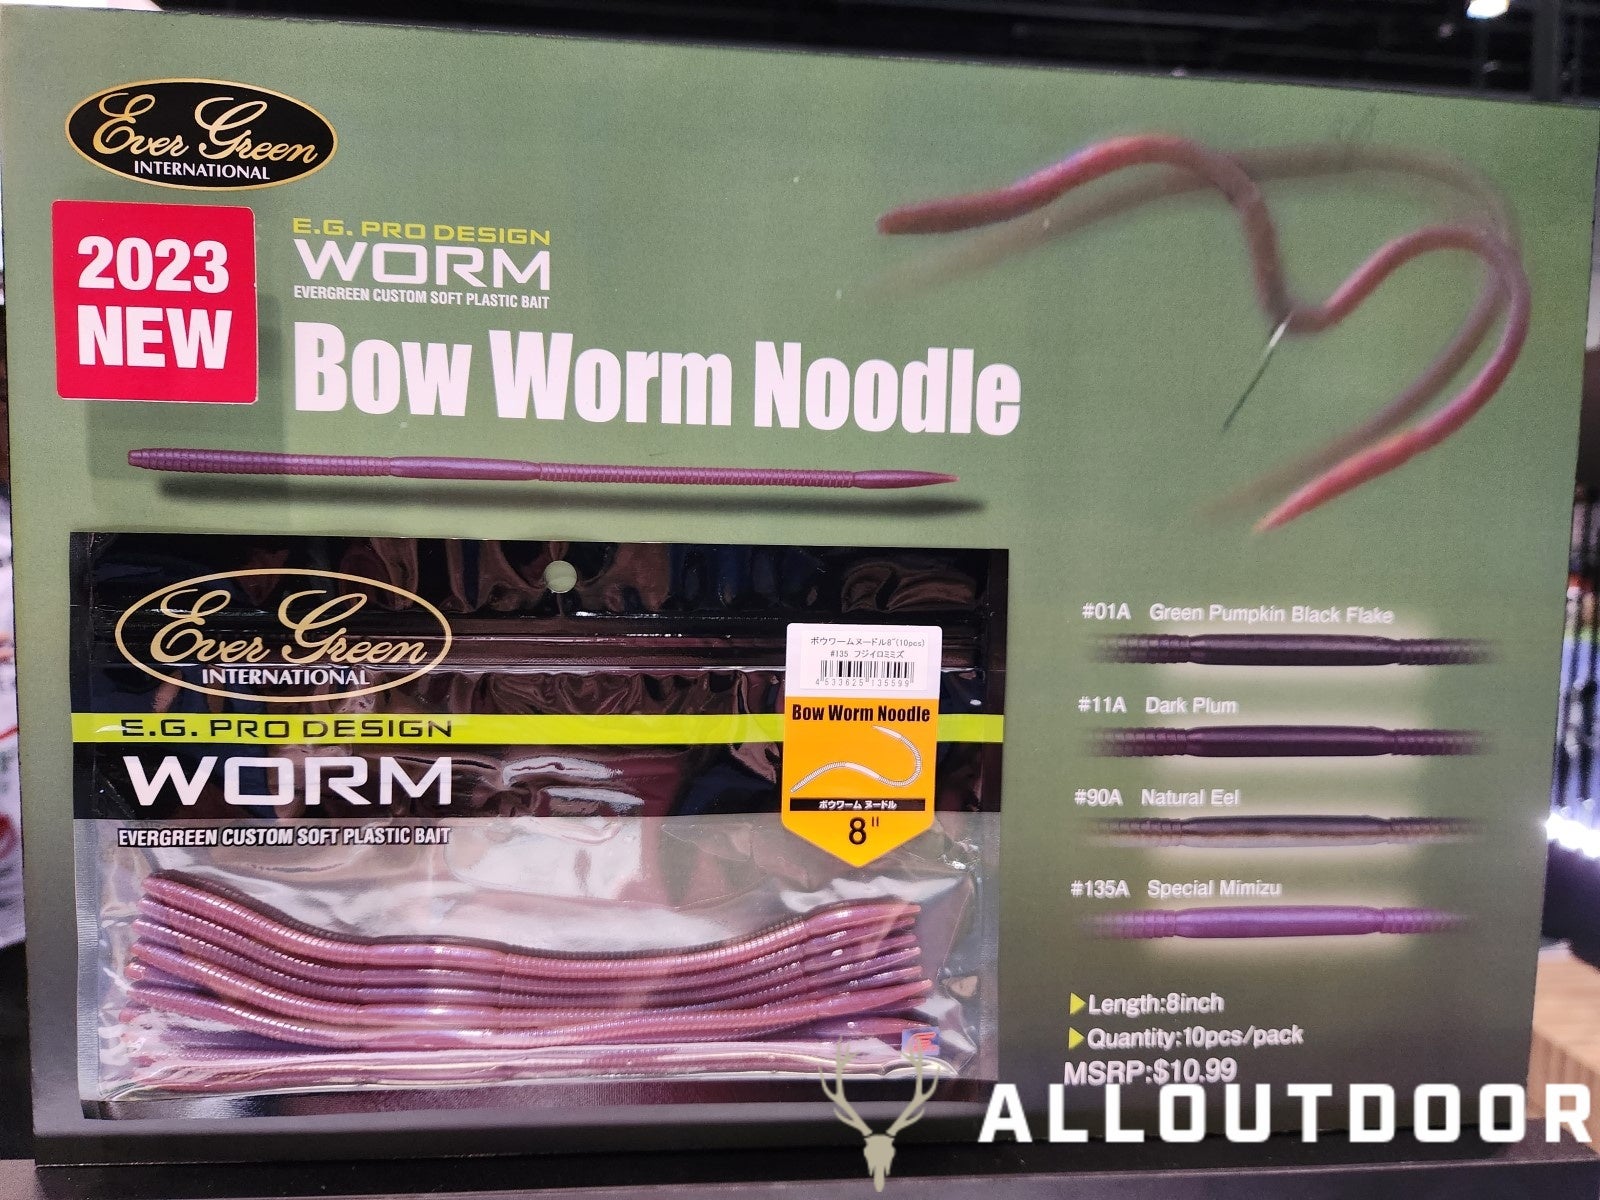 [ICAST 2023] The Bow Worm Noodle from Ever Green International